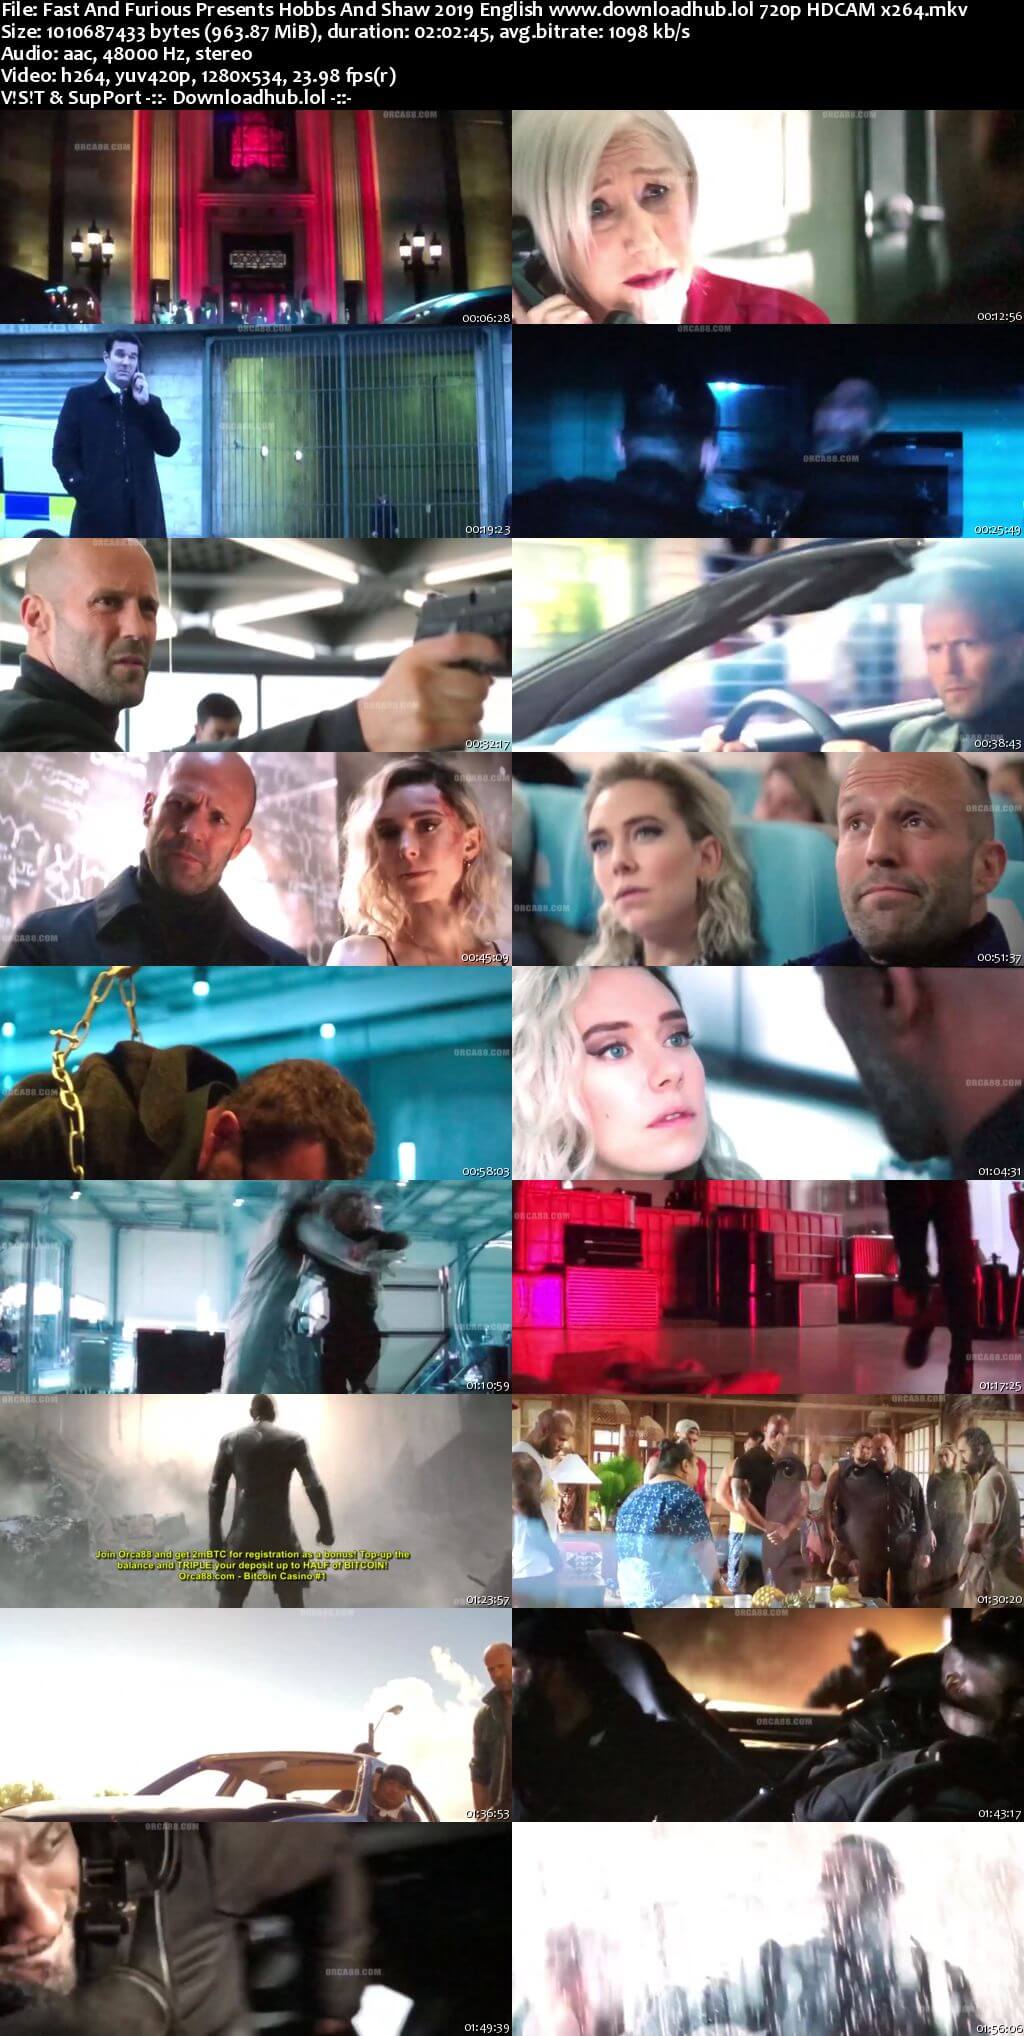 Fast And Furious Presents Hobbs And Shaw 2019 English 720p HDCAM x264